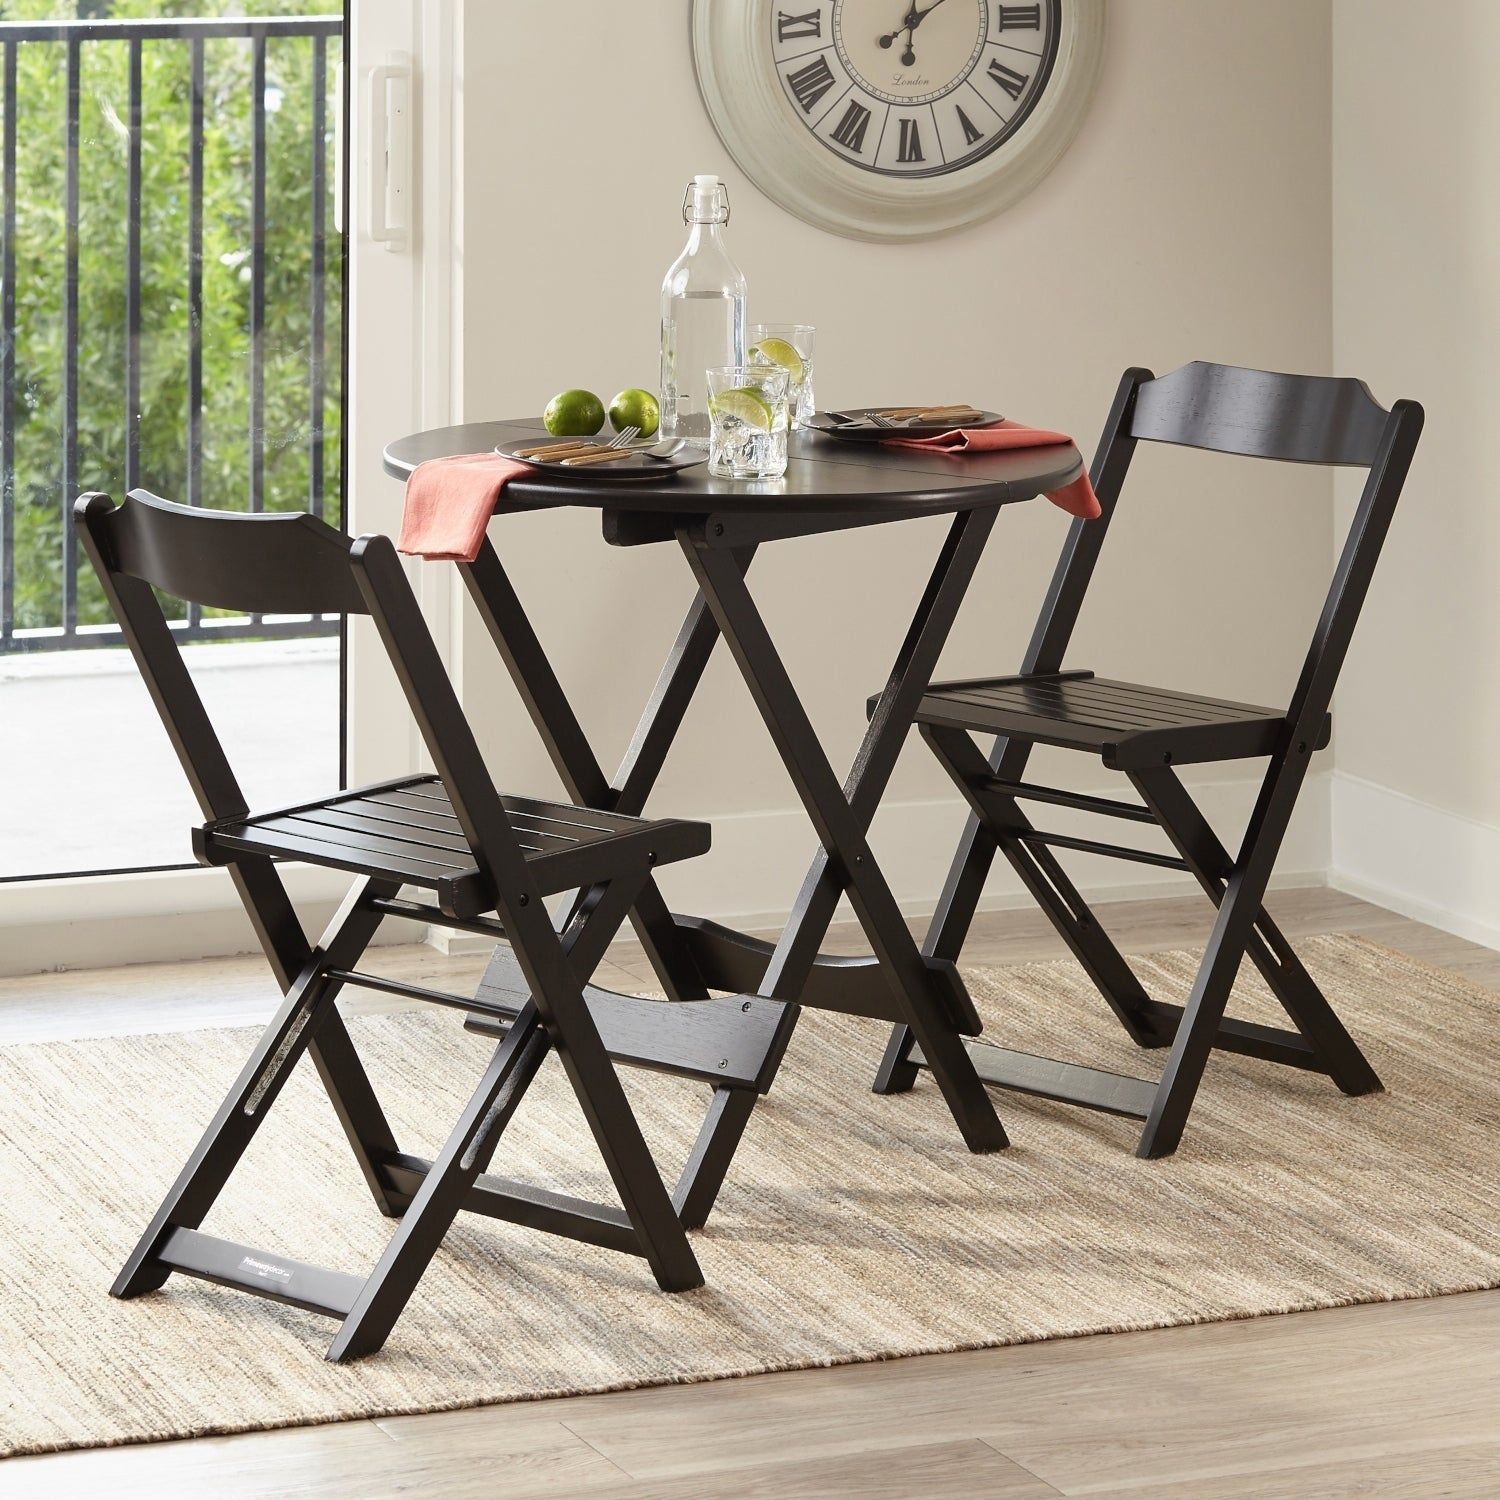 Well Liked Shop Bistro Set 3 Piece Outdoor Dining Set Round Table Folding Intended For Lonon 3 Piece Dining Sets (View 11 of 20)